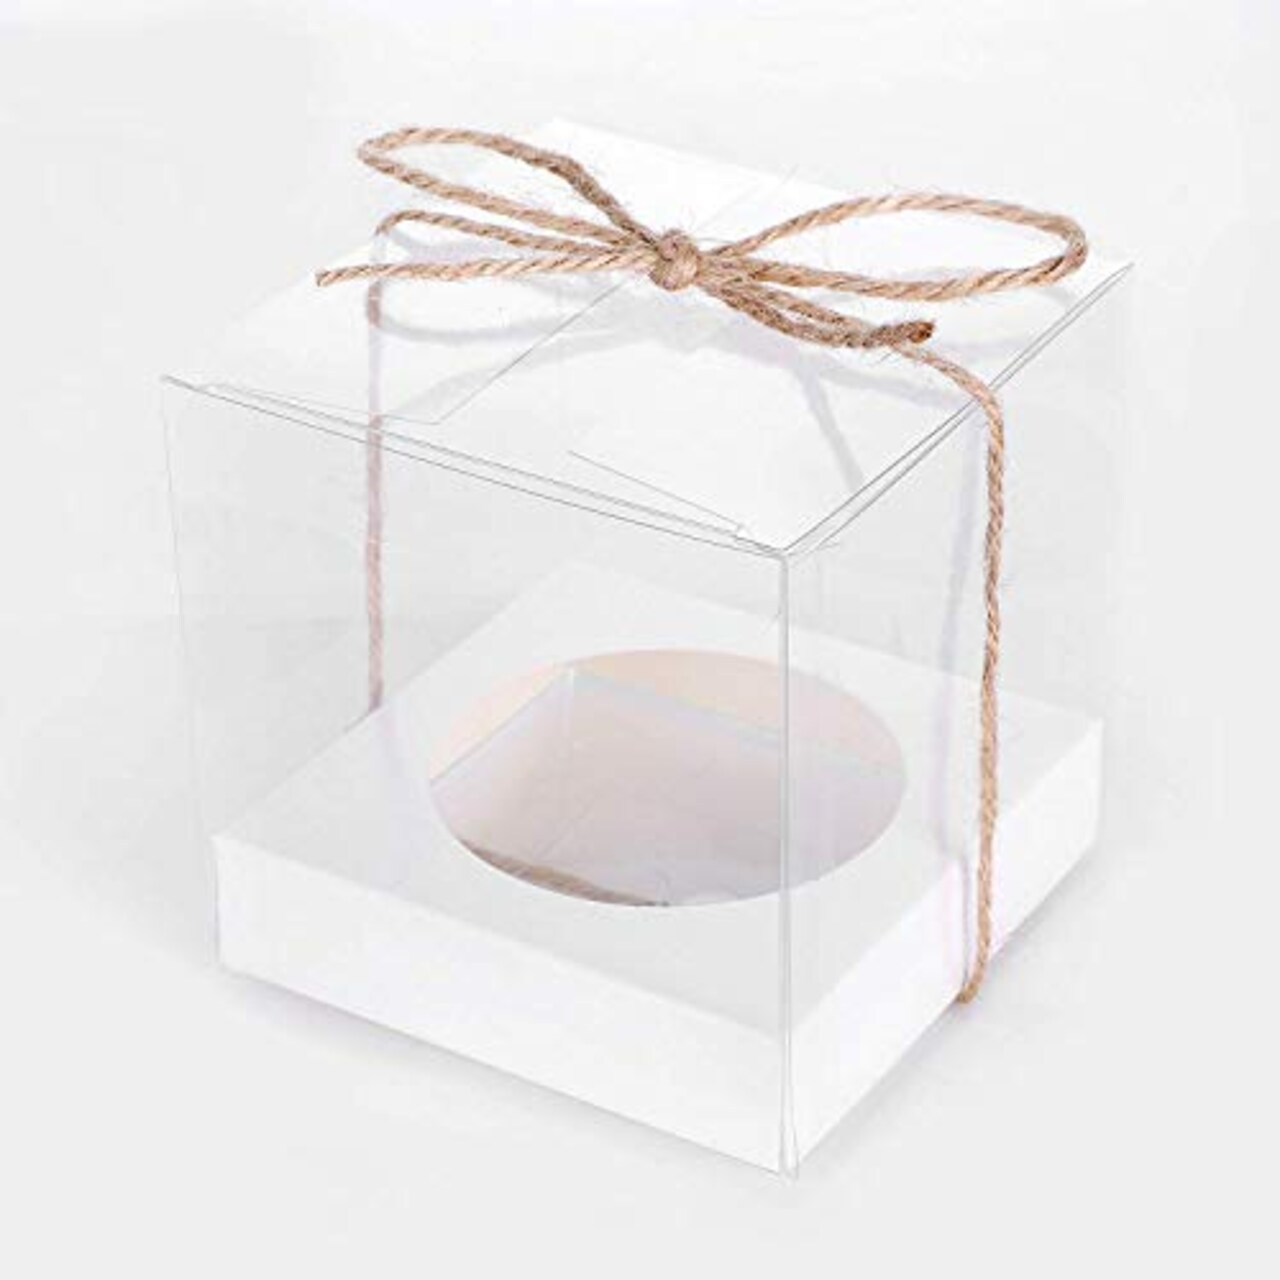 12pcs Single Clear Cupcake Containers, Clear Boxes for Favors 3.5x3.5x3.5  inch, Wedding Favor Gift Box with Inserts and Ribbon,Individual Packaging  for Display(White)